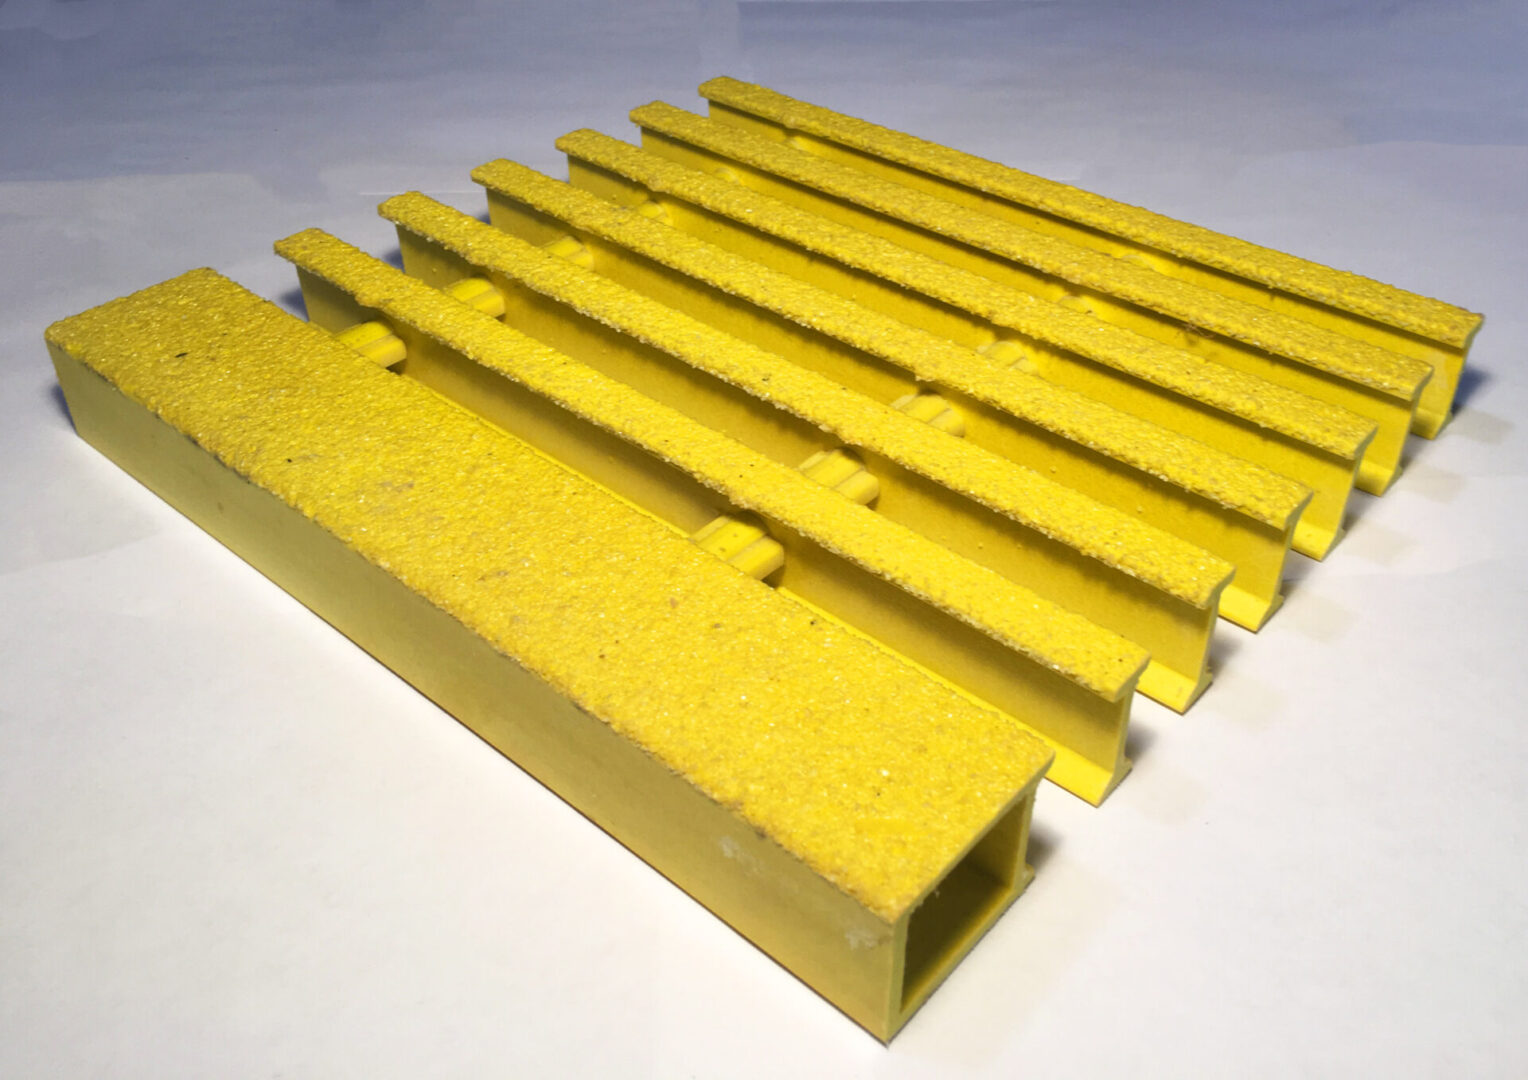 A yellow plastic bar with some holes in it